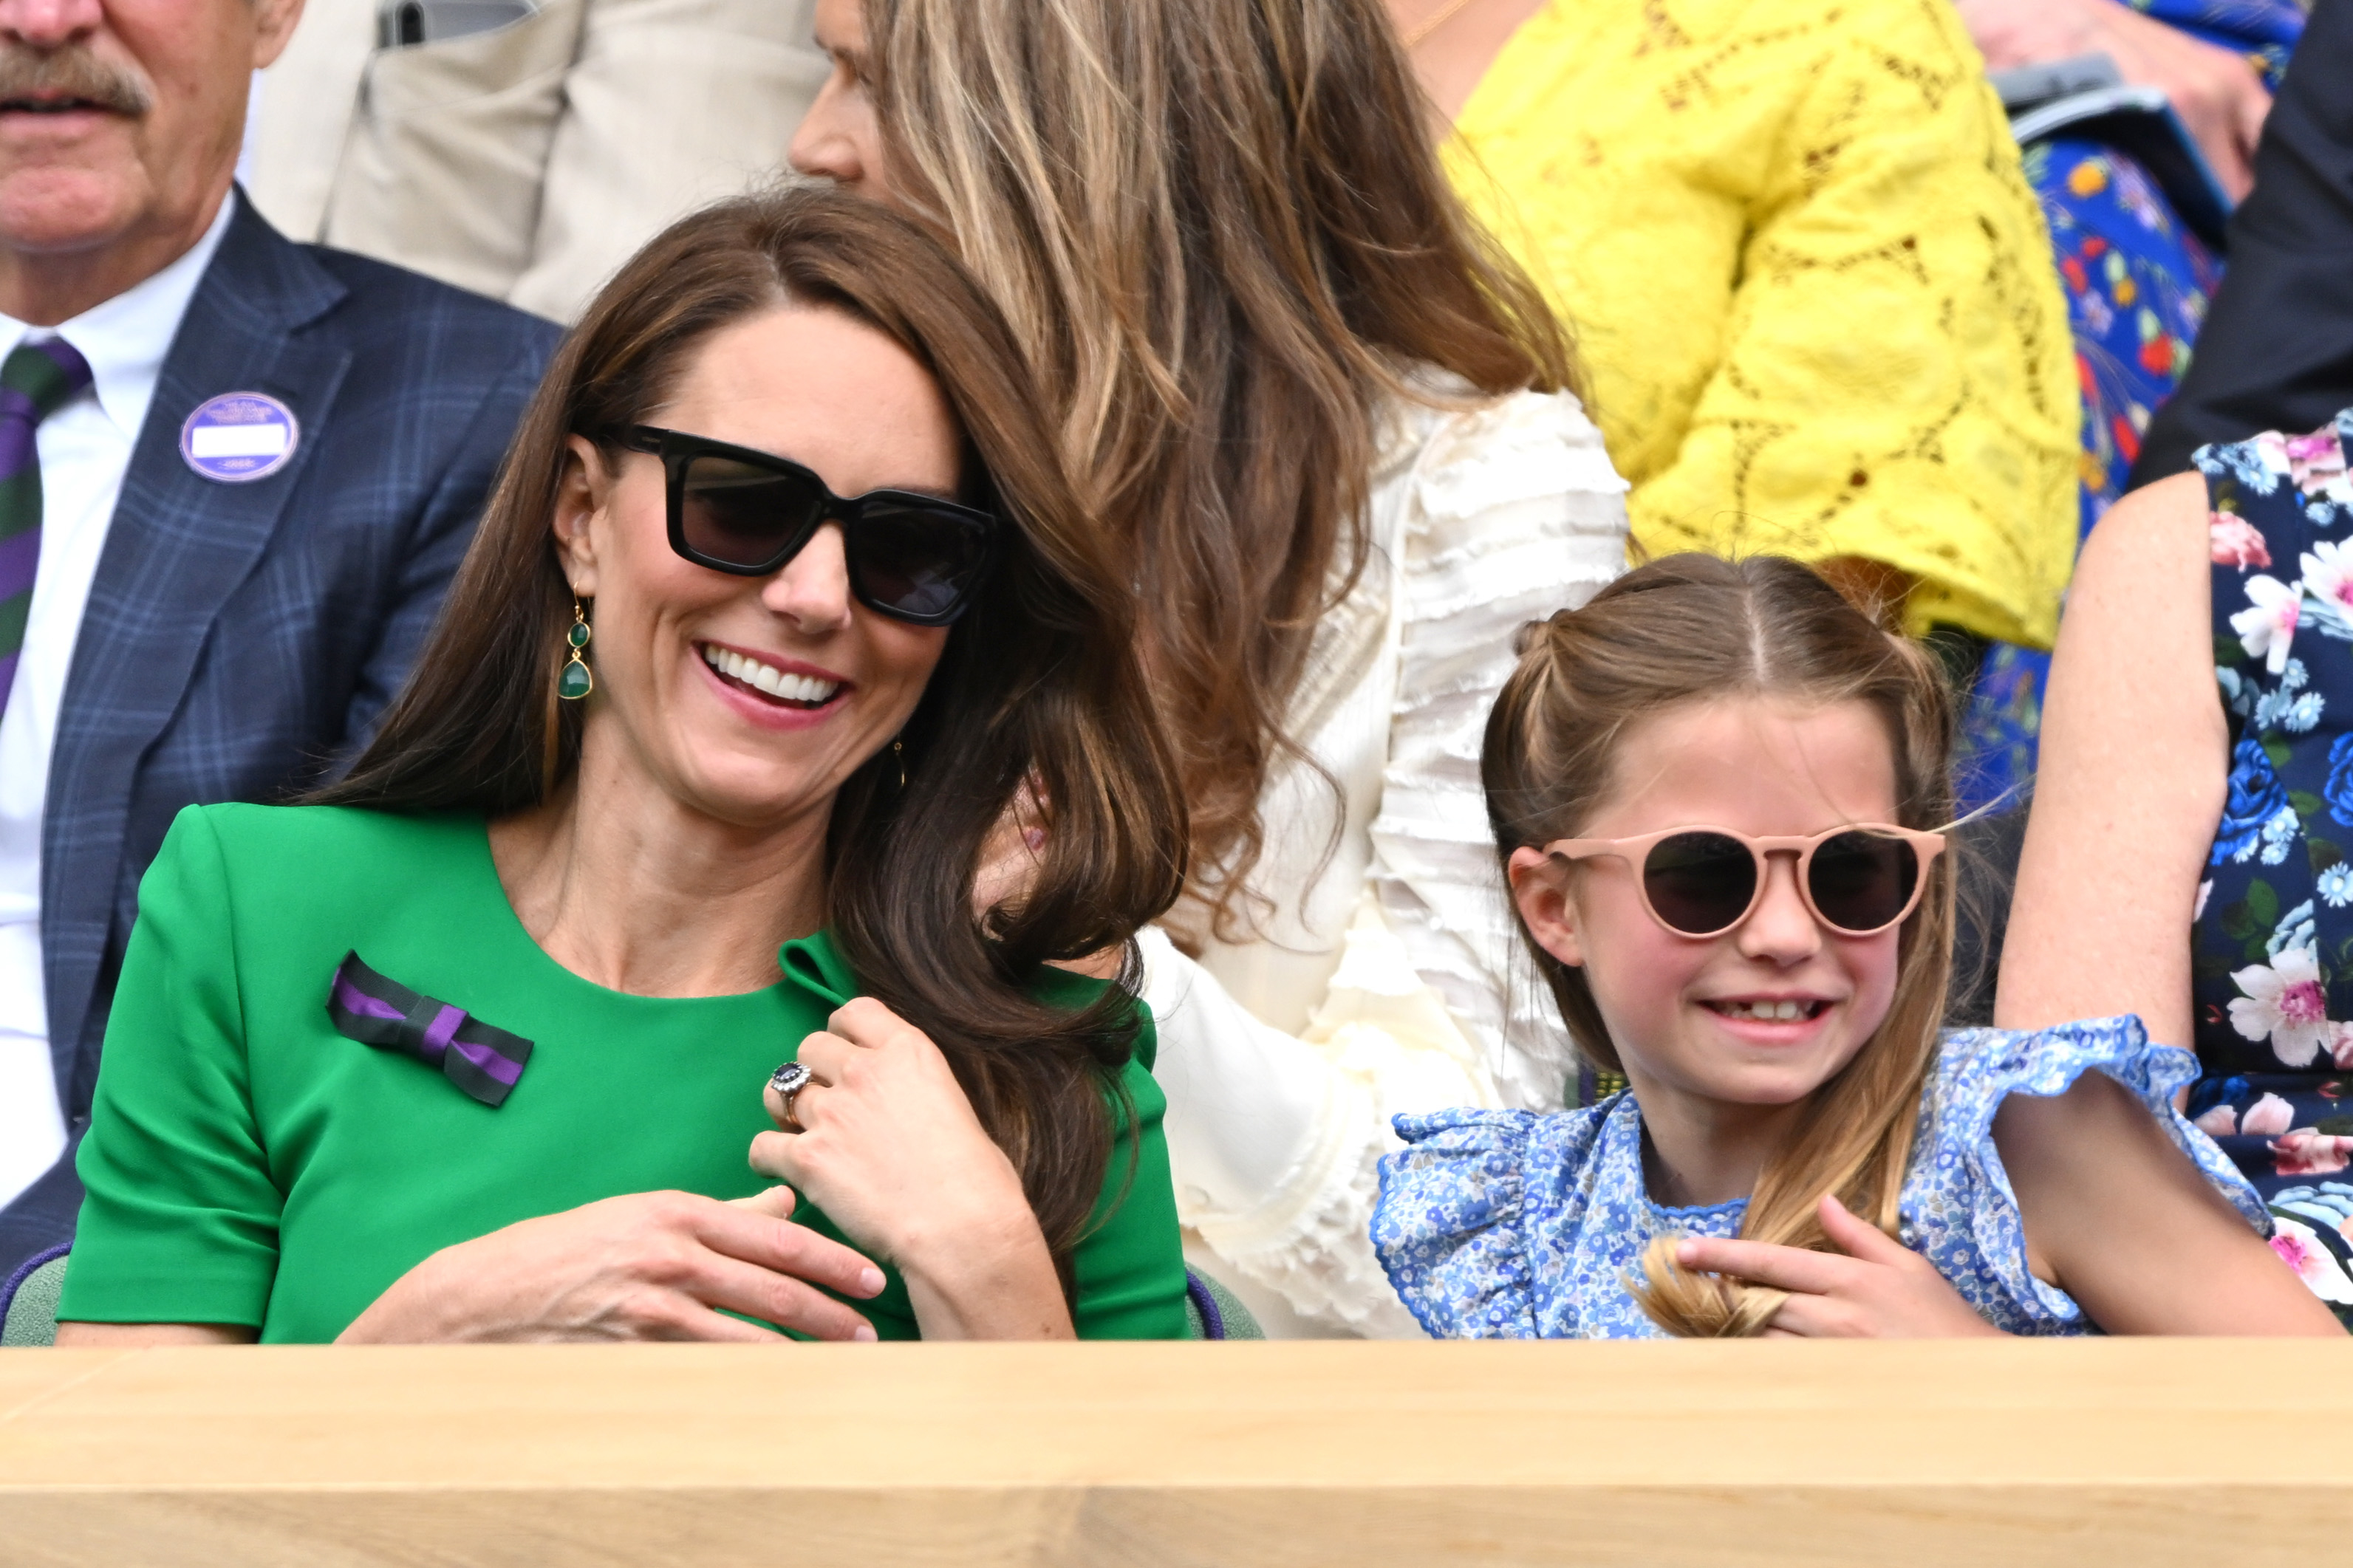 Kate Middleton and Princess Charlotte wearing sunglasses and smiling while sitting outdoors